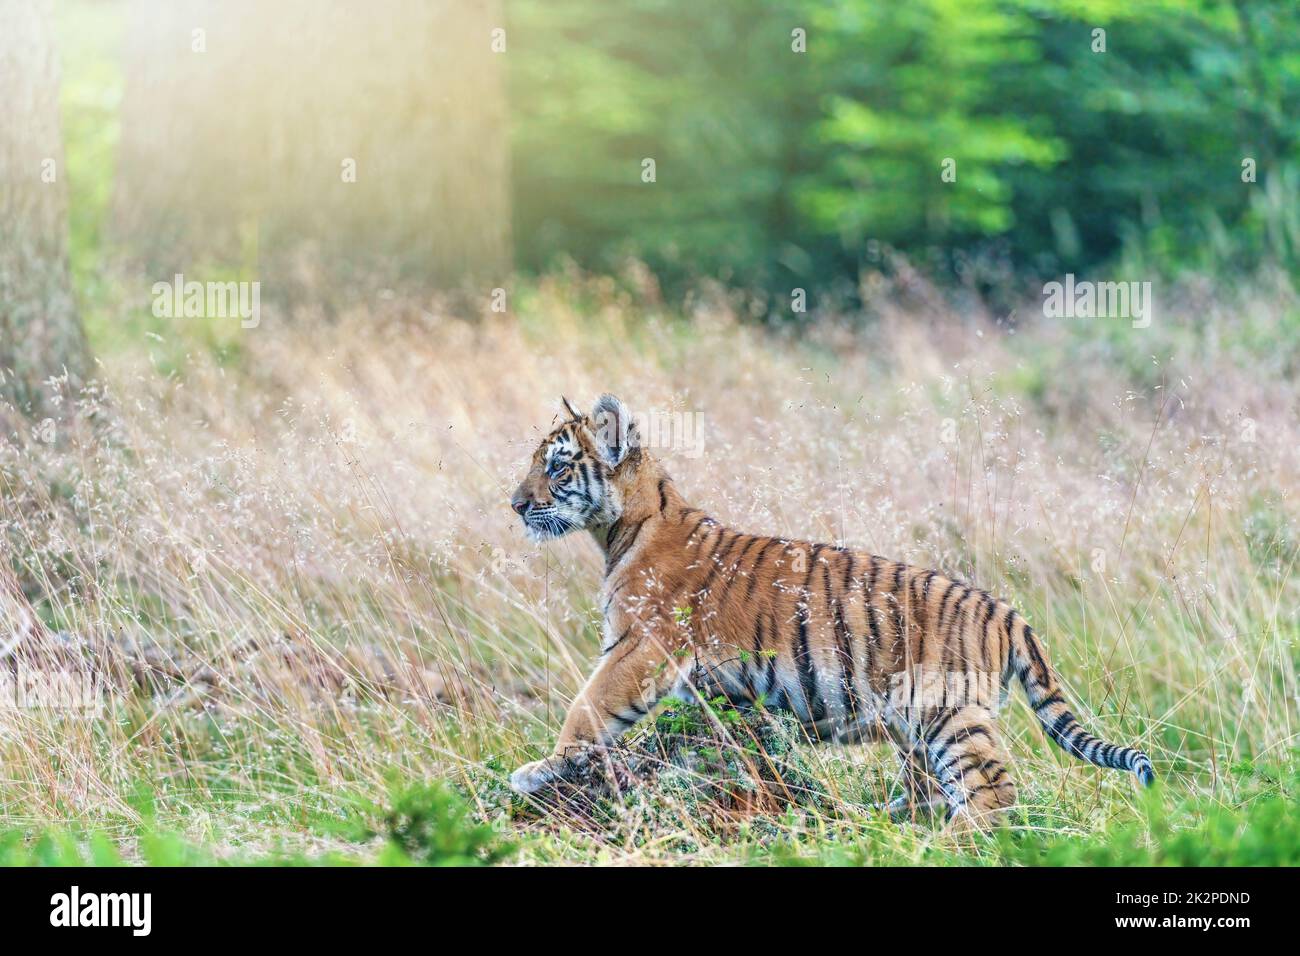 Bengal tiger cub is posing in the grass. Stock Photo